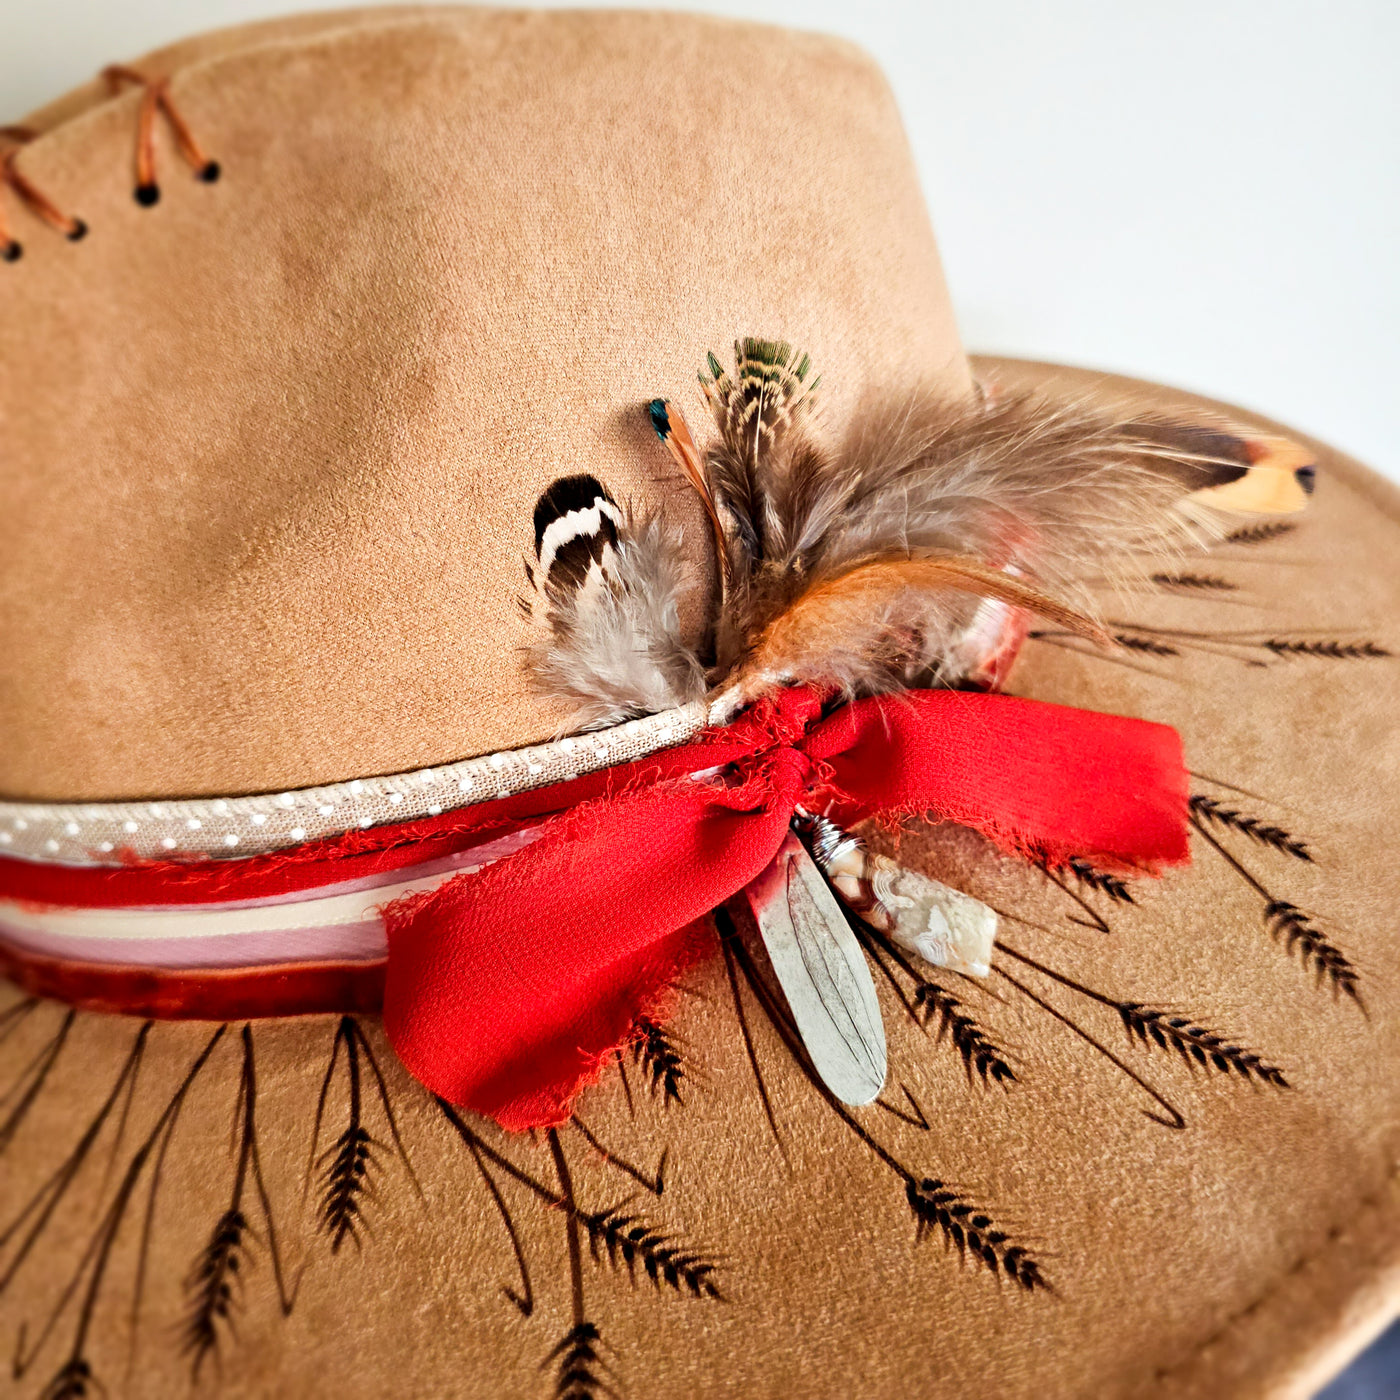 The Wheat State || Tan Suede Burned Wide Brim Hat